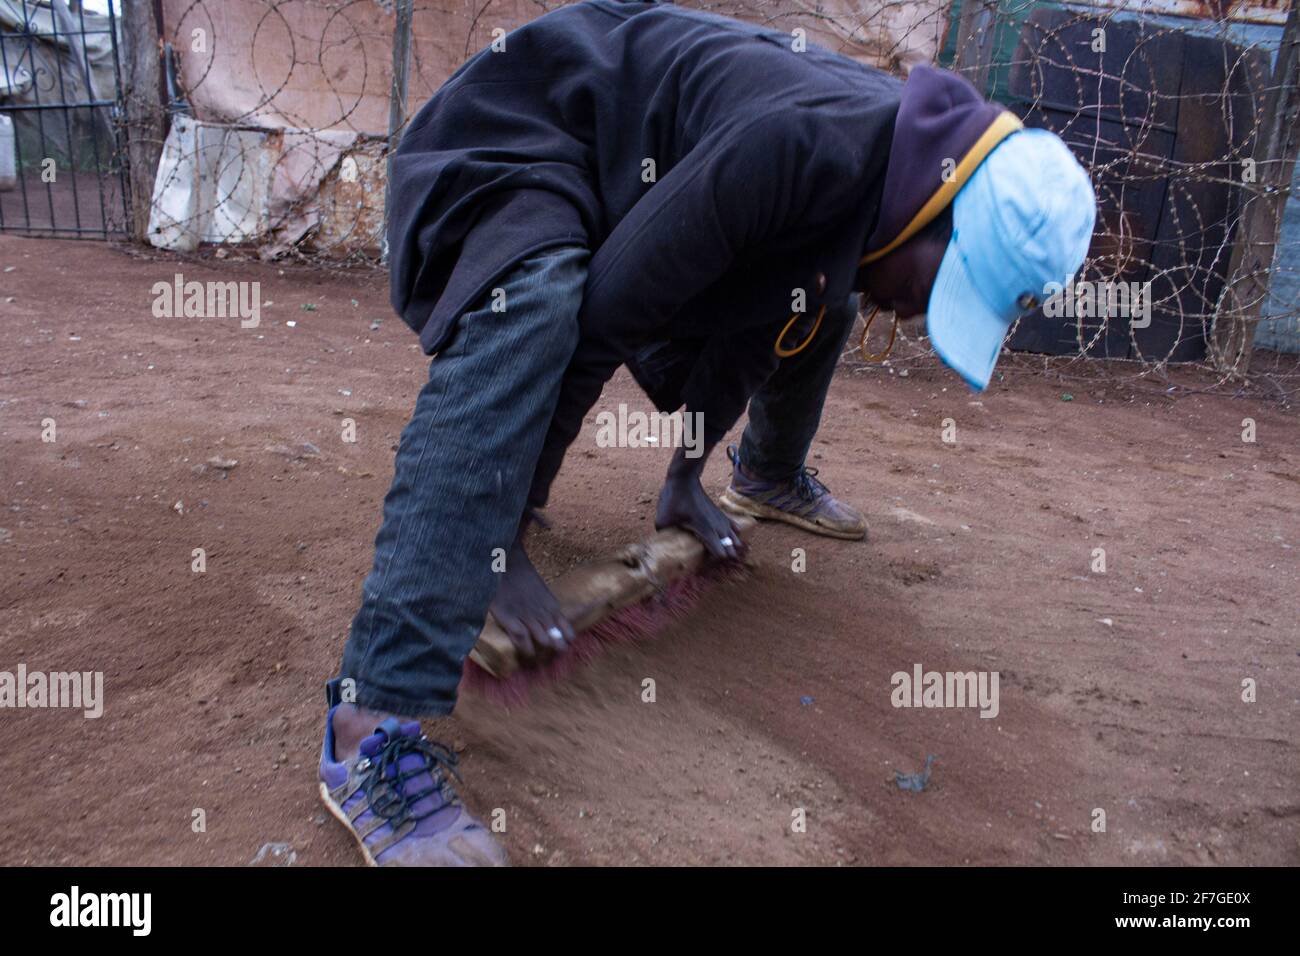 An Informal Illegal gold mine worker Sweeping dust in the streets of the township in Xawela, Carletonville in Johannesburg, South Africa on September 2nd, 2020. (Photo by Manash Das/Sipa USA) Credit: Sipa USA/Alamy Live News Stock Photo